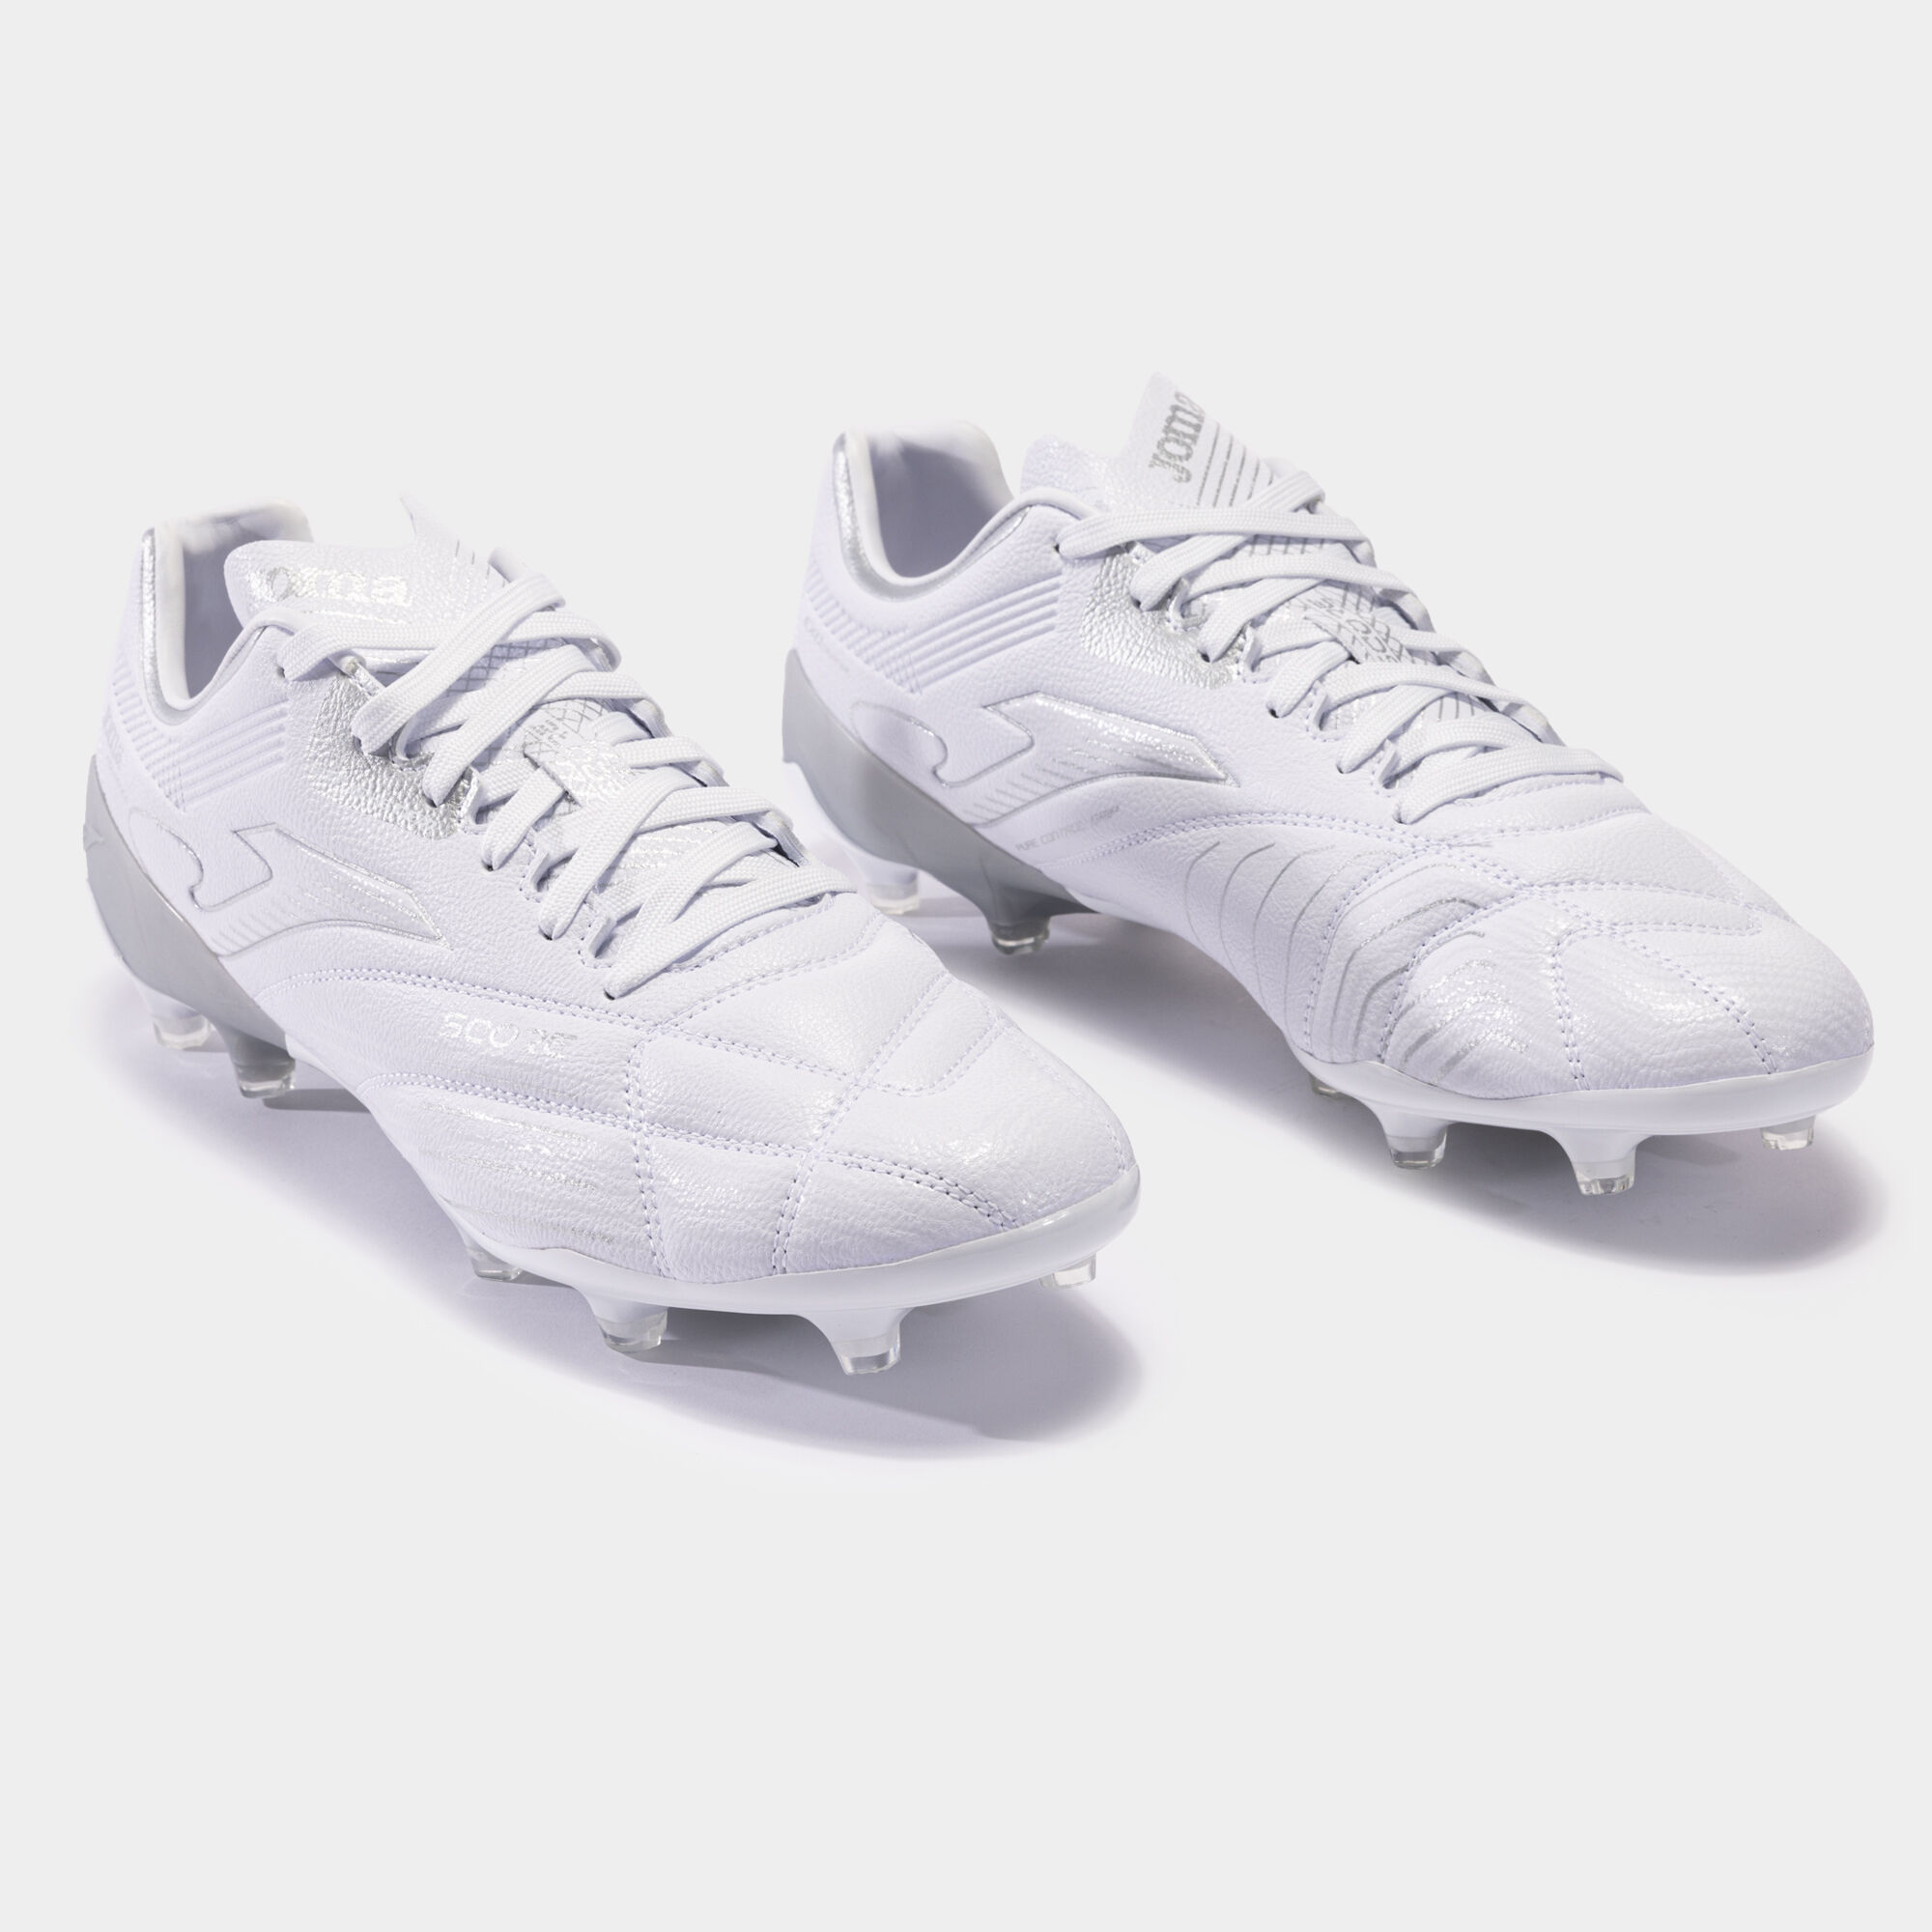 Football boots Score 23 firm ground FG white